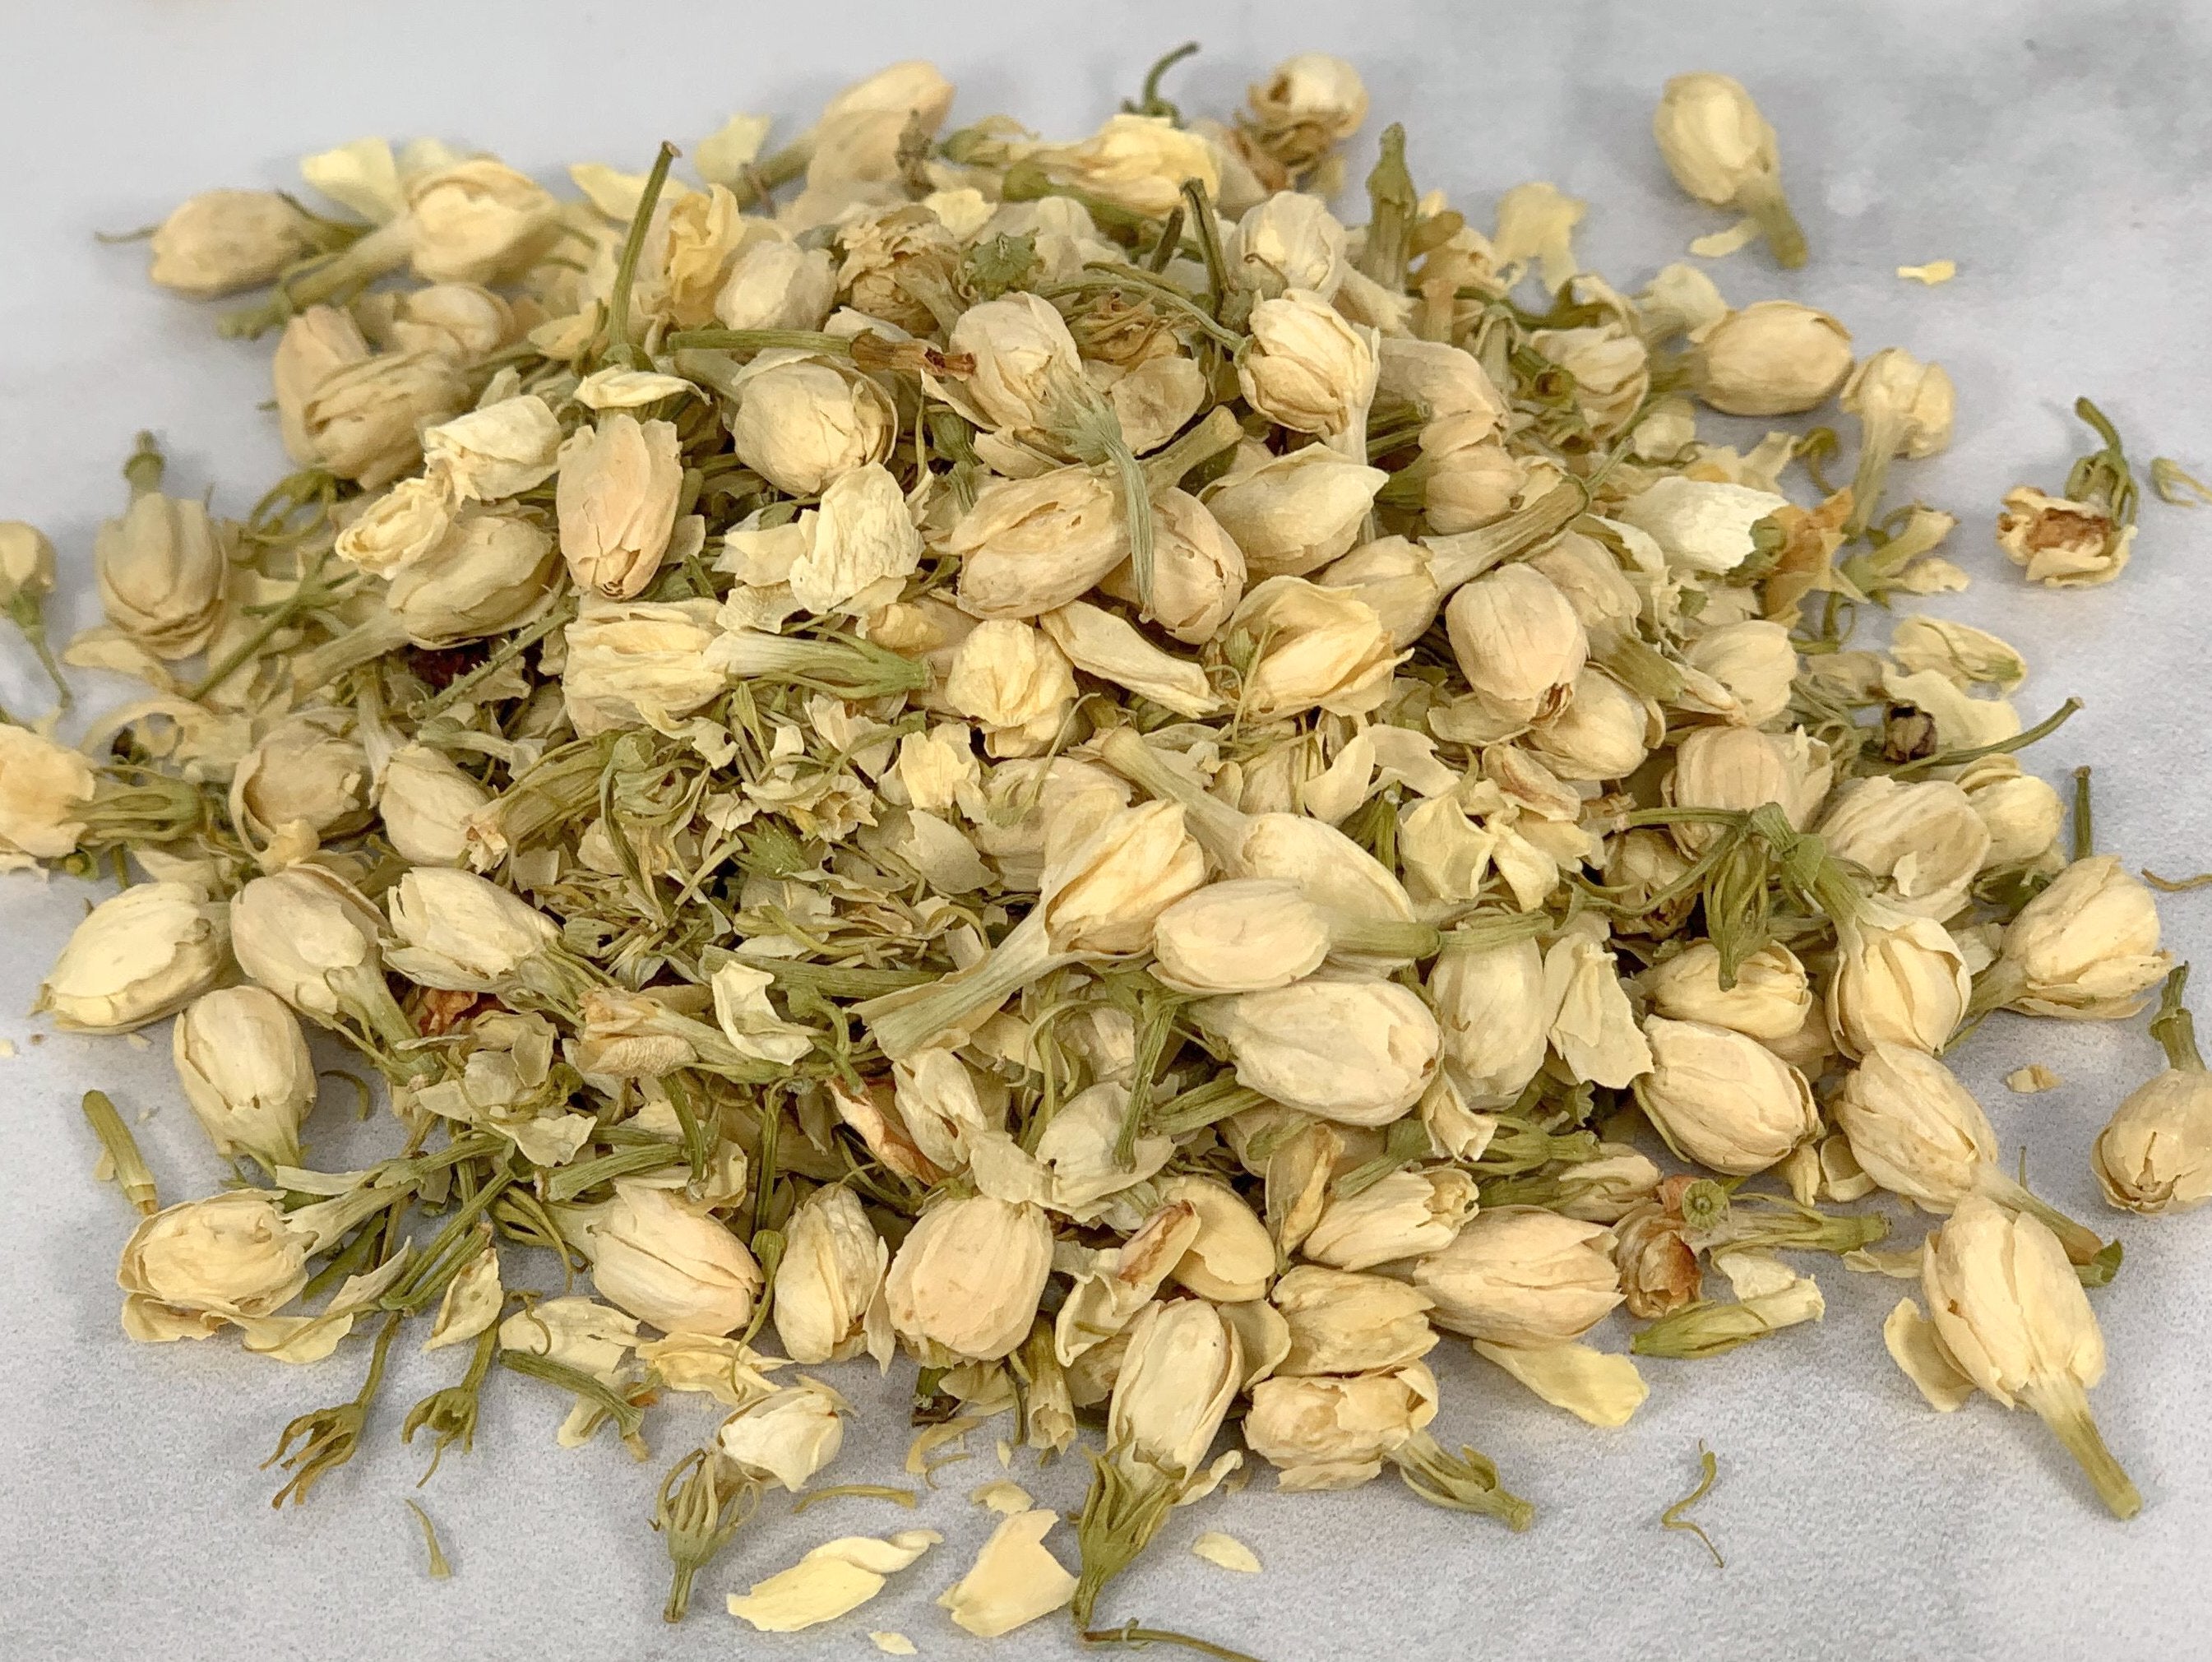 NY SPICE SHOP Jasmine Dried Flowers - Fresh Edible Flower For Drinks -  Lotus Root Flowering Tea (4 Ounces)